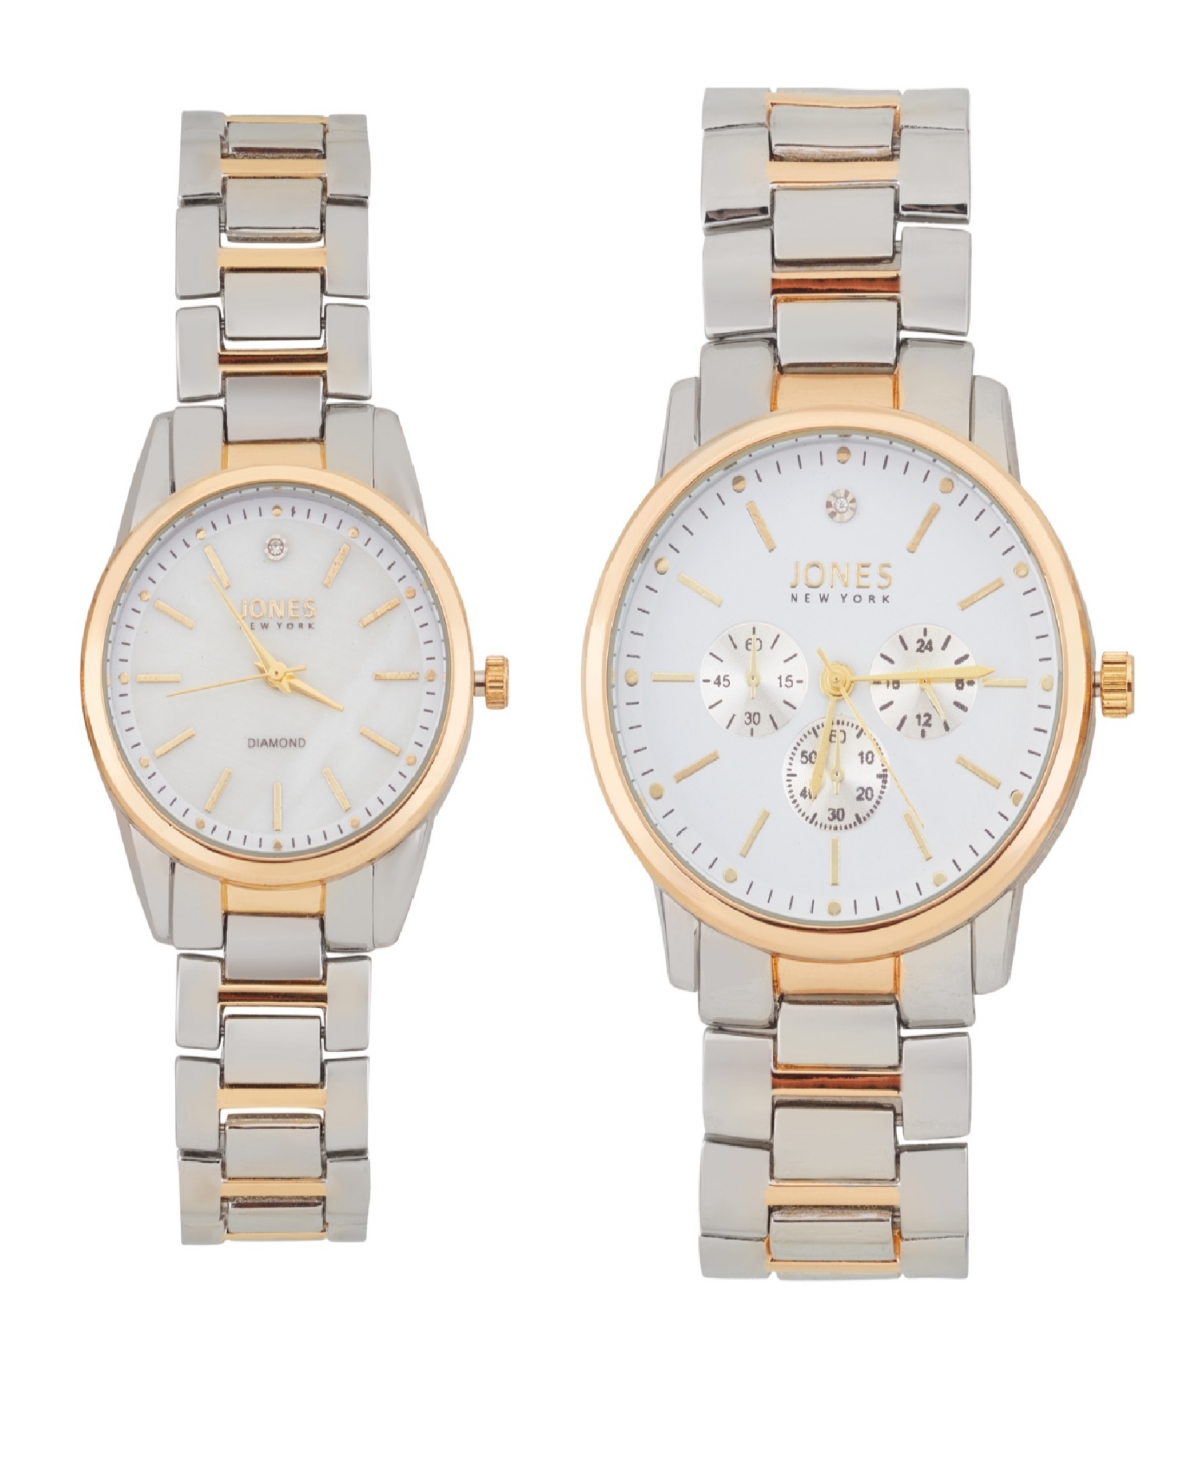 Men and Women's Analog Shiny Two-Tone Metal Bracelet His Hers Watch 42mm, 32mm Gift Set - White, Gold, Silver